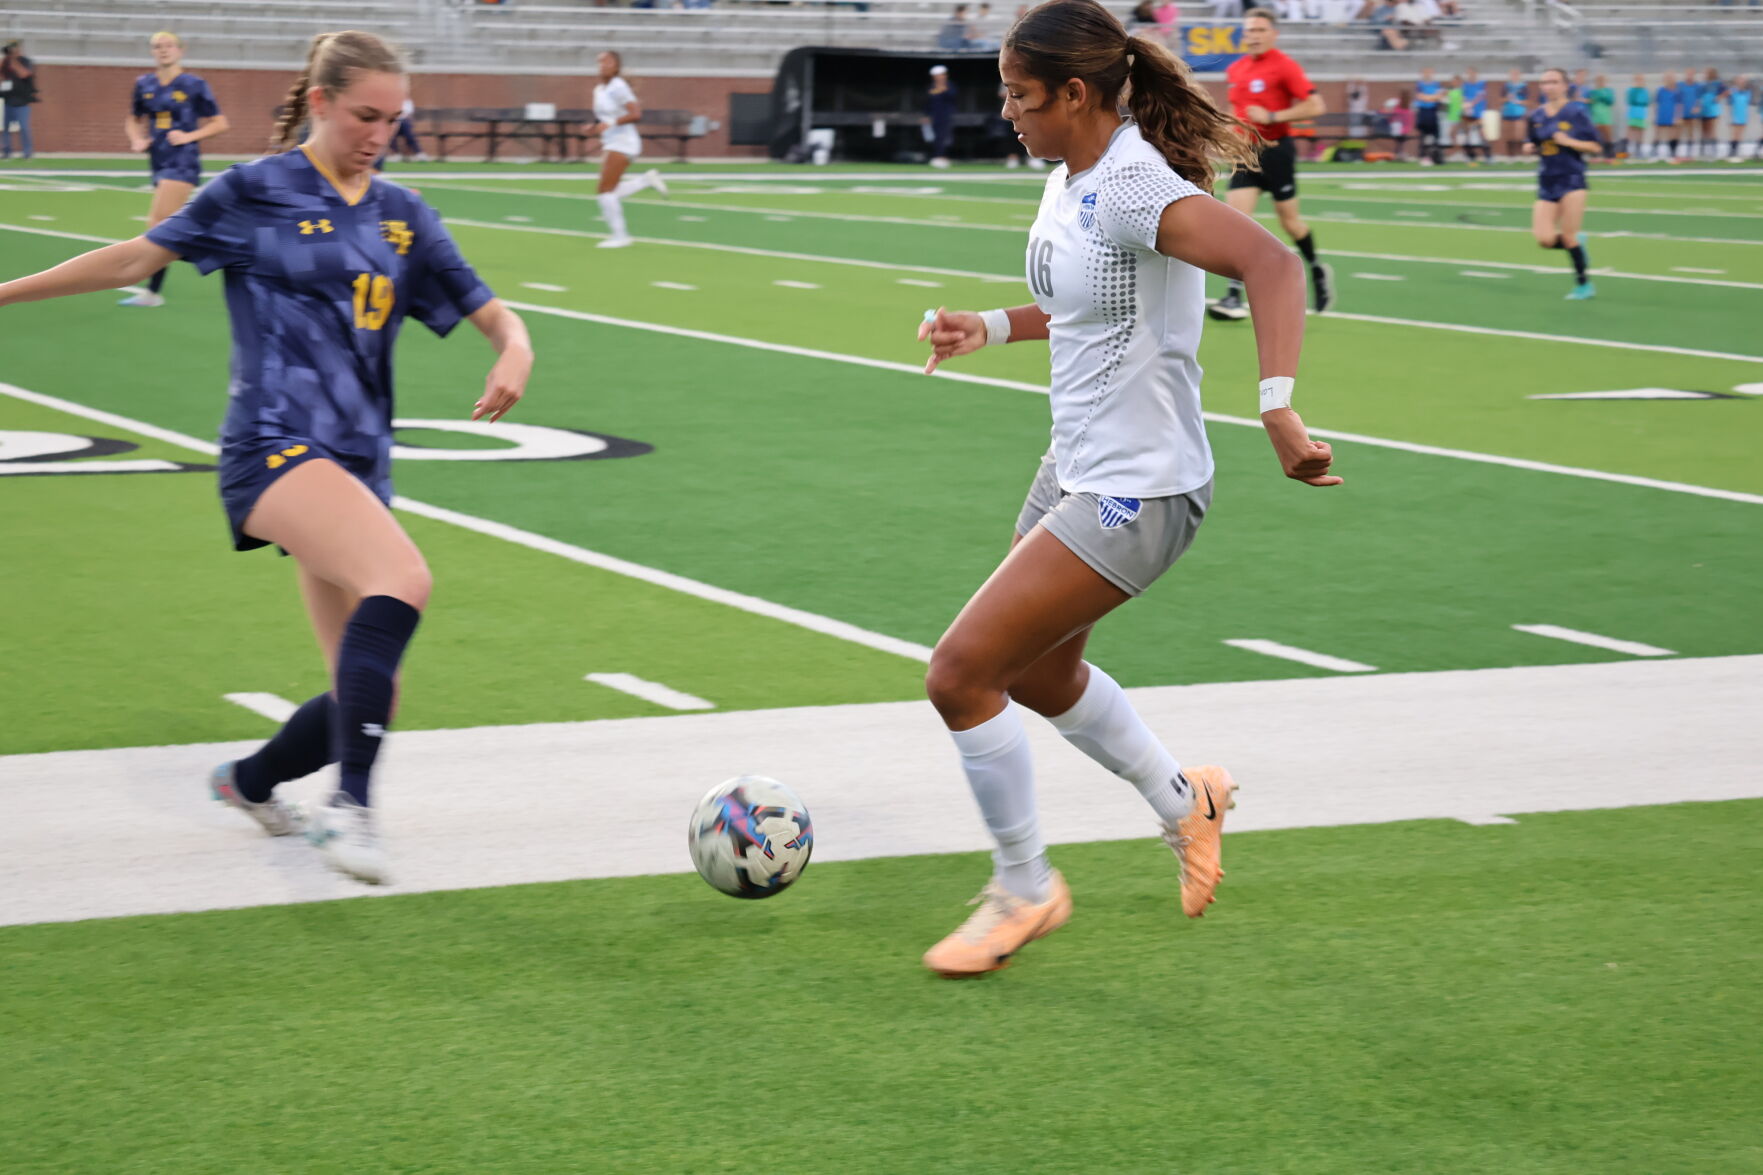 Stars on the pitch: Denton County soccer players earn nods on District 6-6A soccer teams